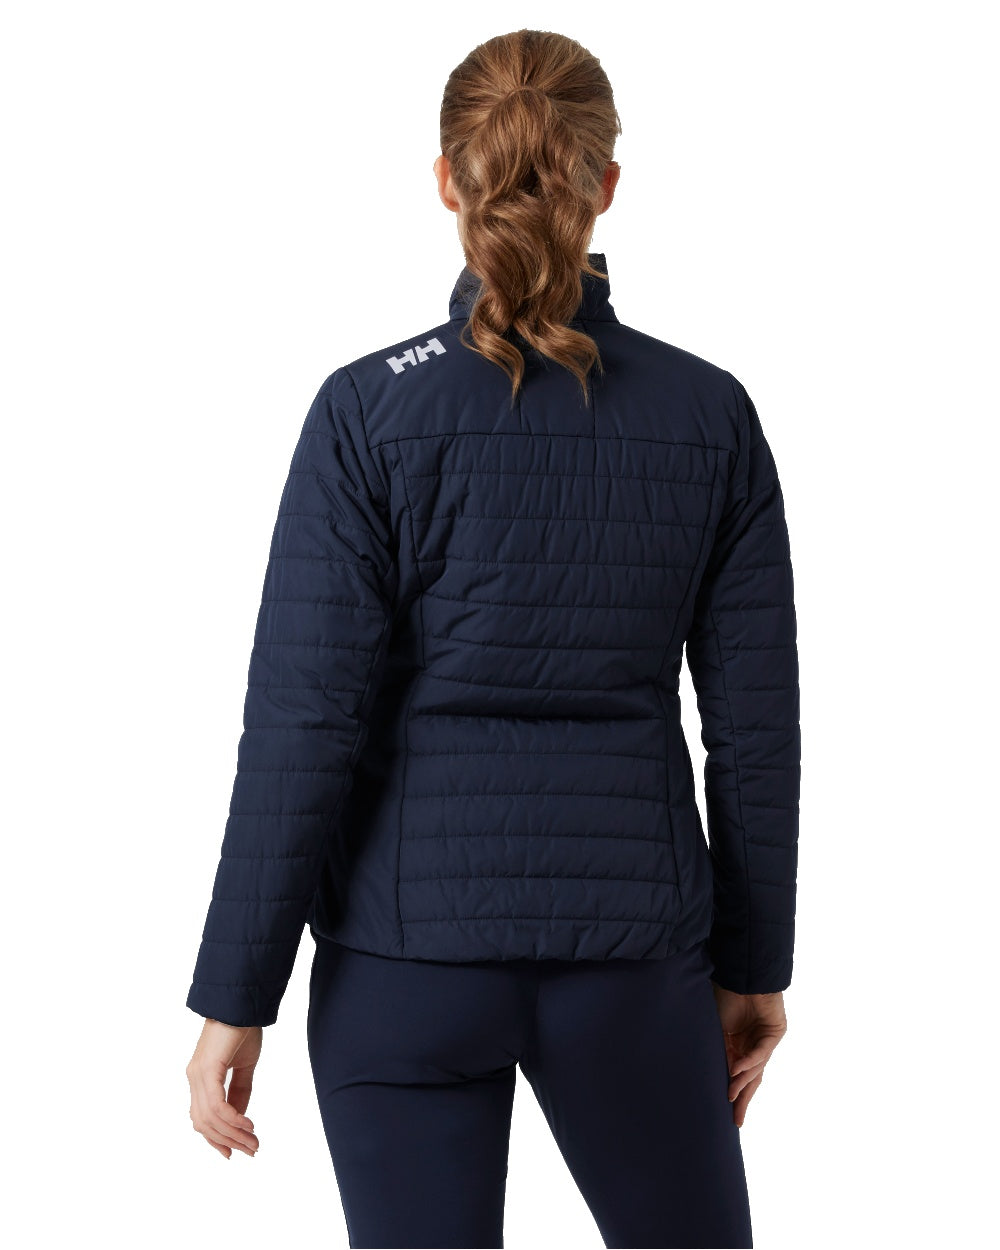 Helly Hansen Womens Crew Insulated Sailing Jacket 2.0 in Navy 